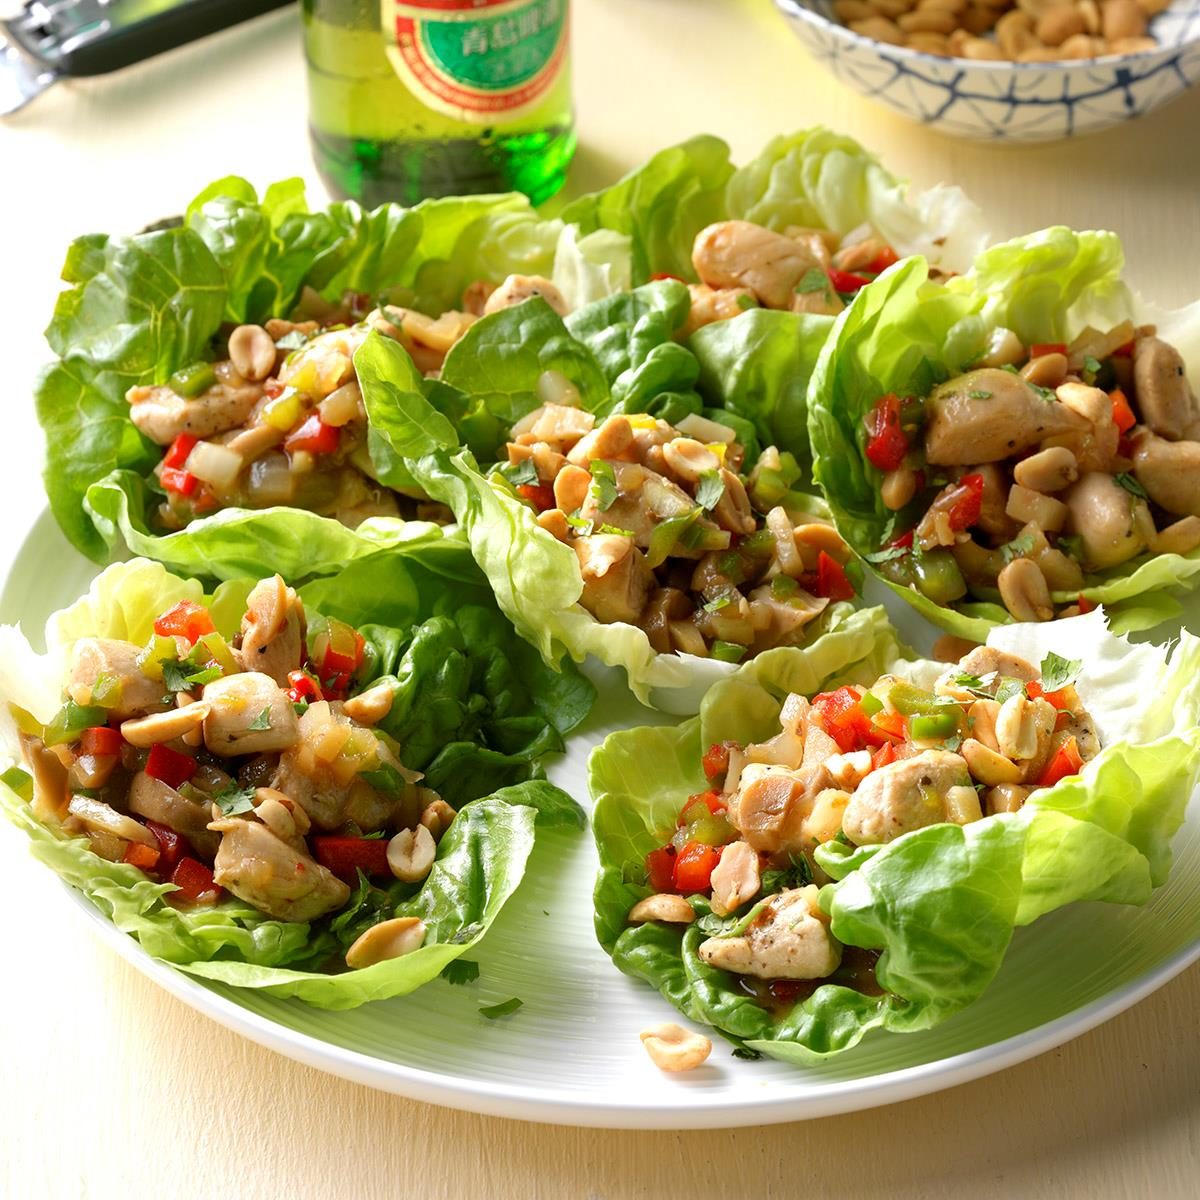 Inspired by: P.F. Chang’s Lettuce Wraps